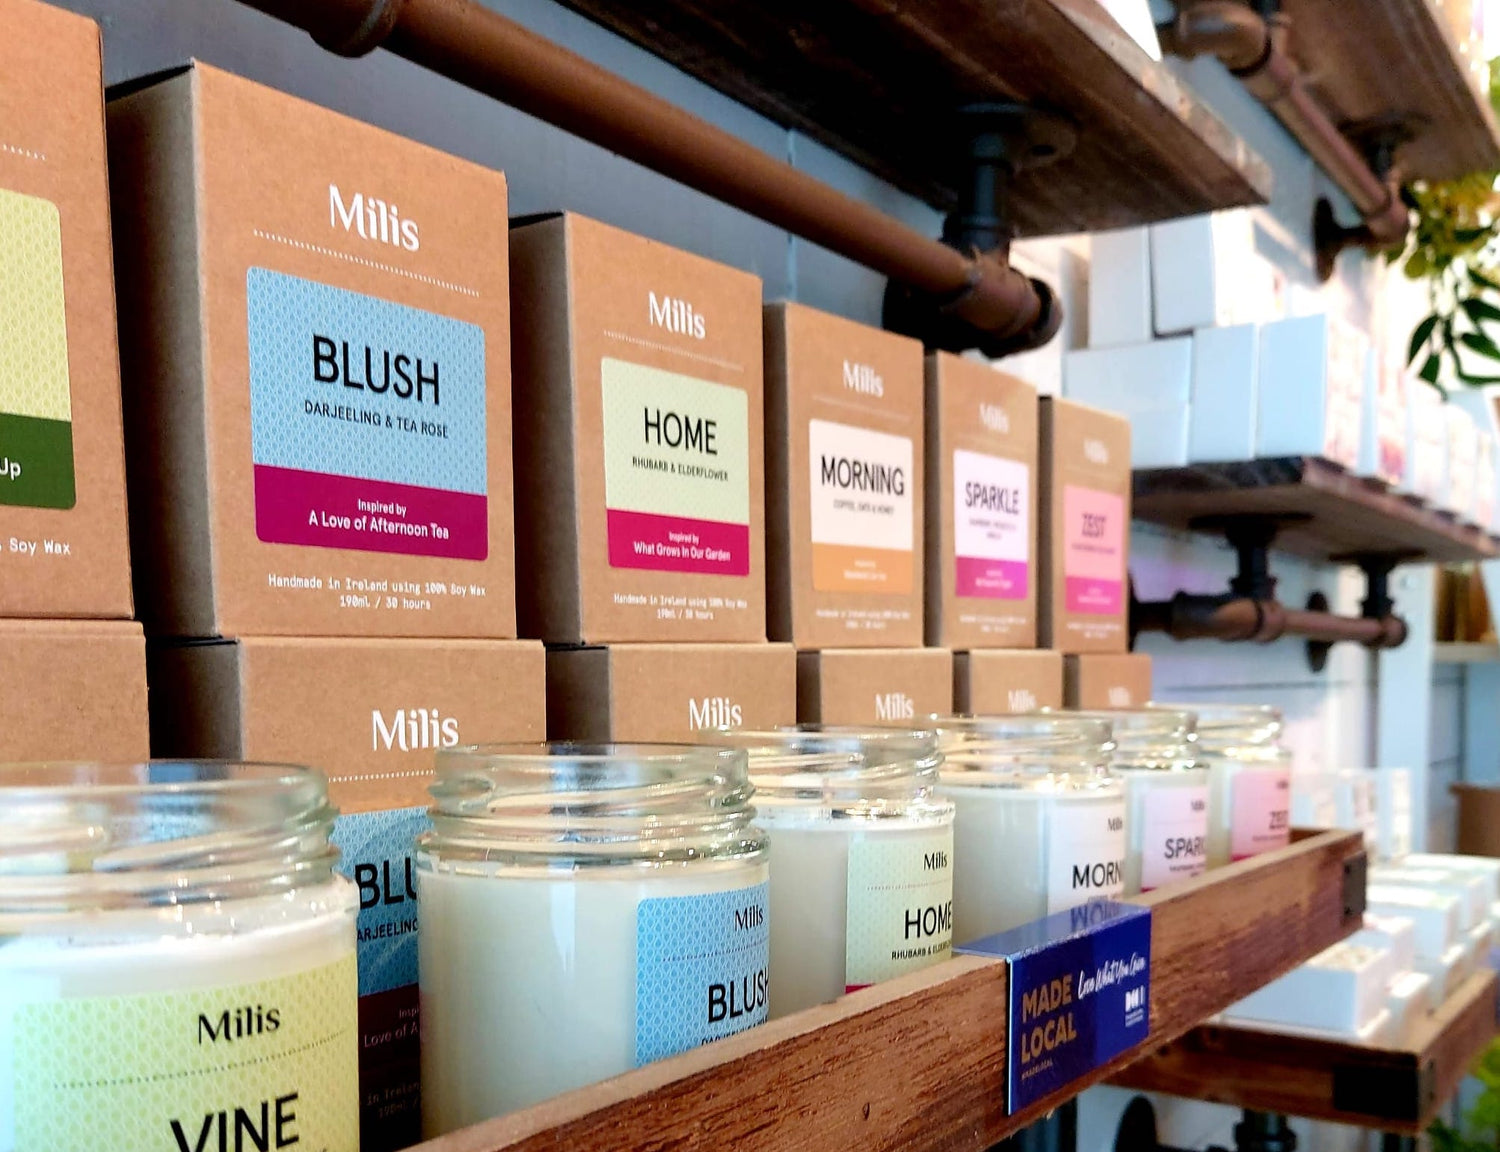 A Display of Milis Candles